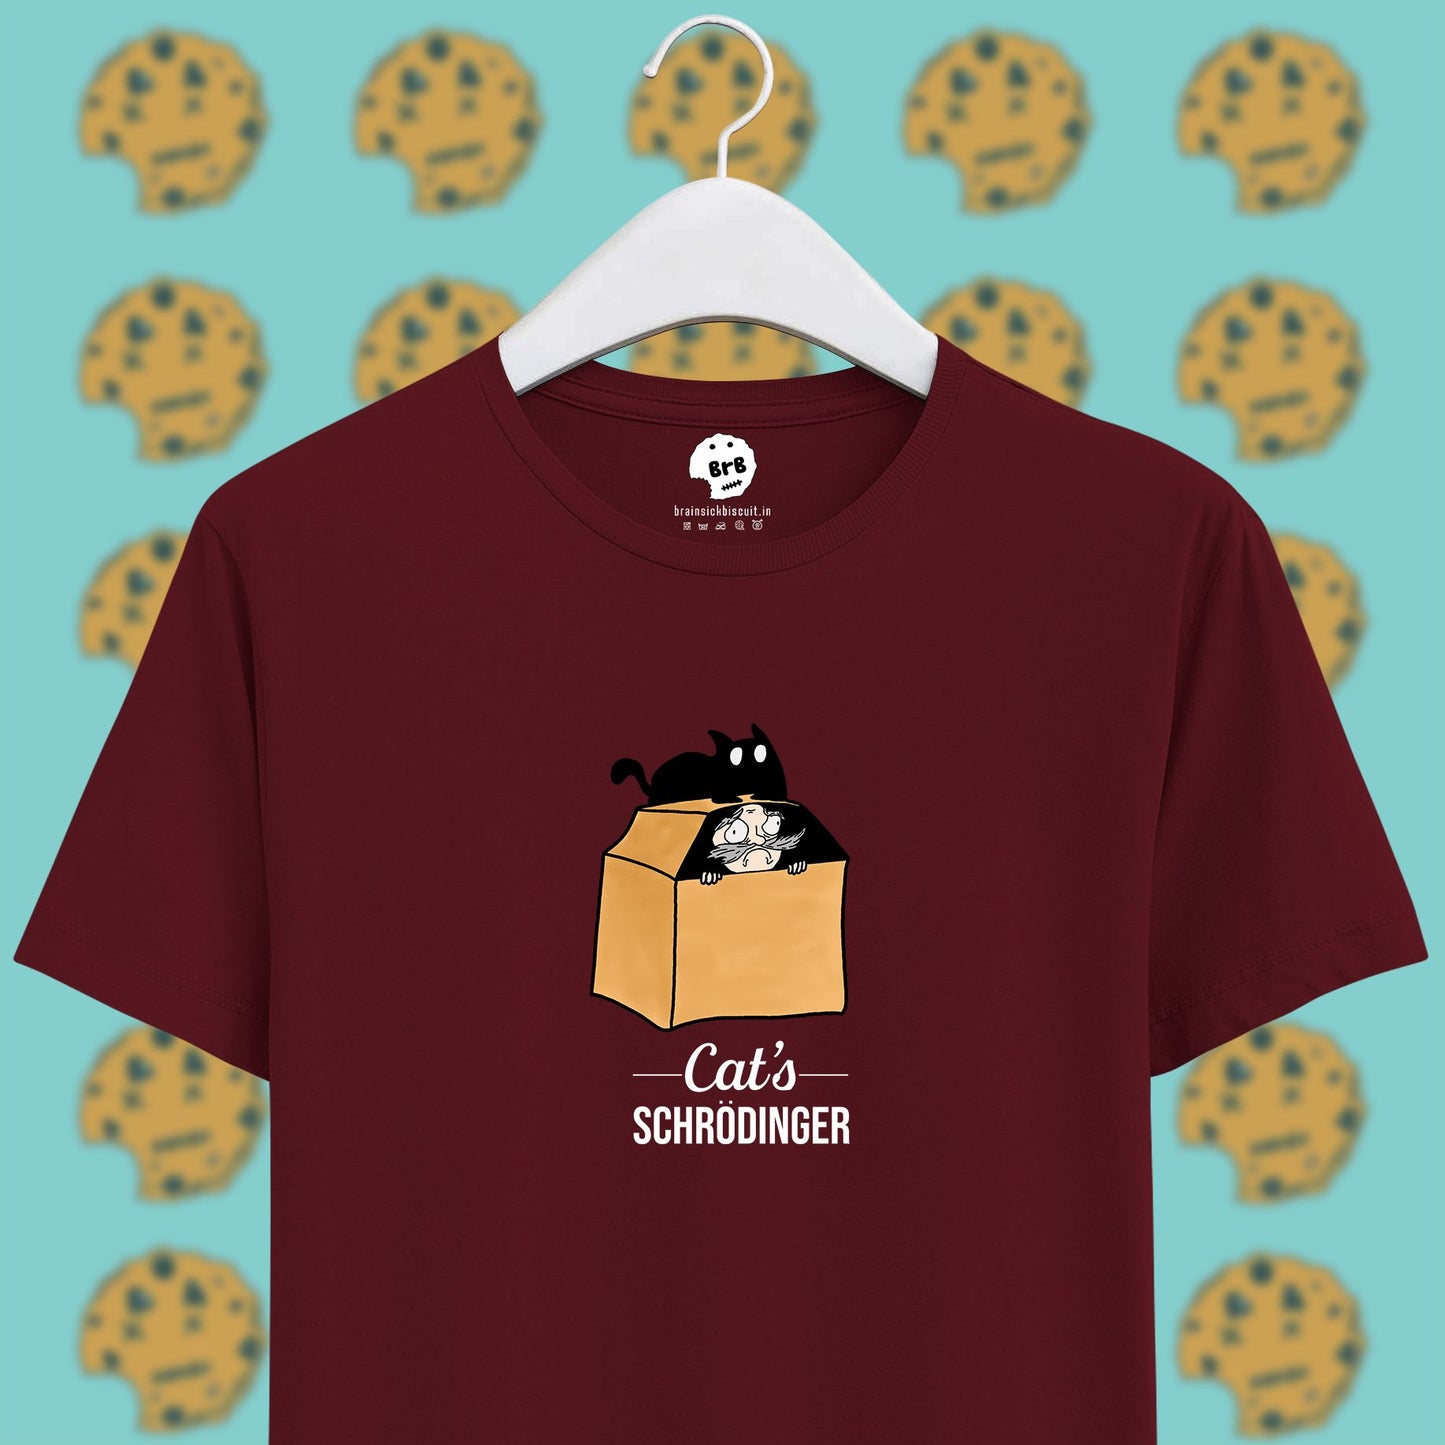 cat's schrodinger reverse thought experiment on maroon half sleeves unisex t-shirt